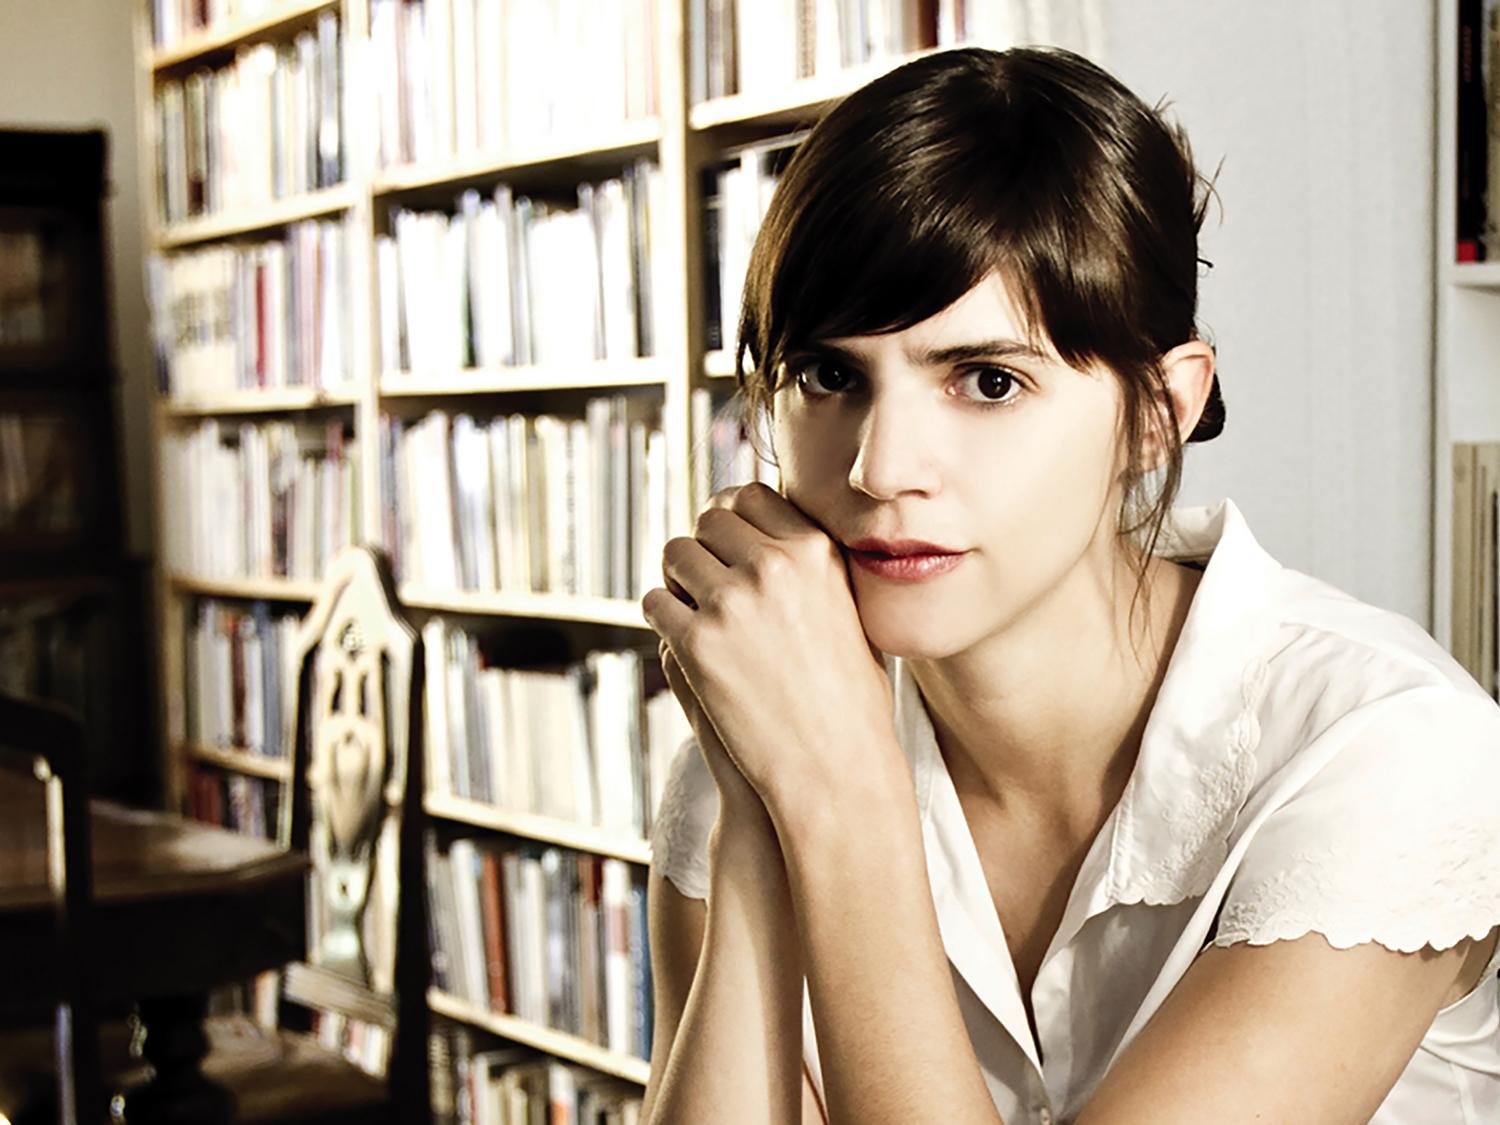 Bard College Appoints Award-Winning Author Valeria Luiselli as Writer in Residence&nbsp;